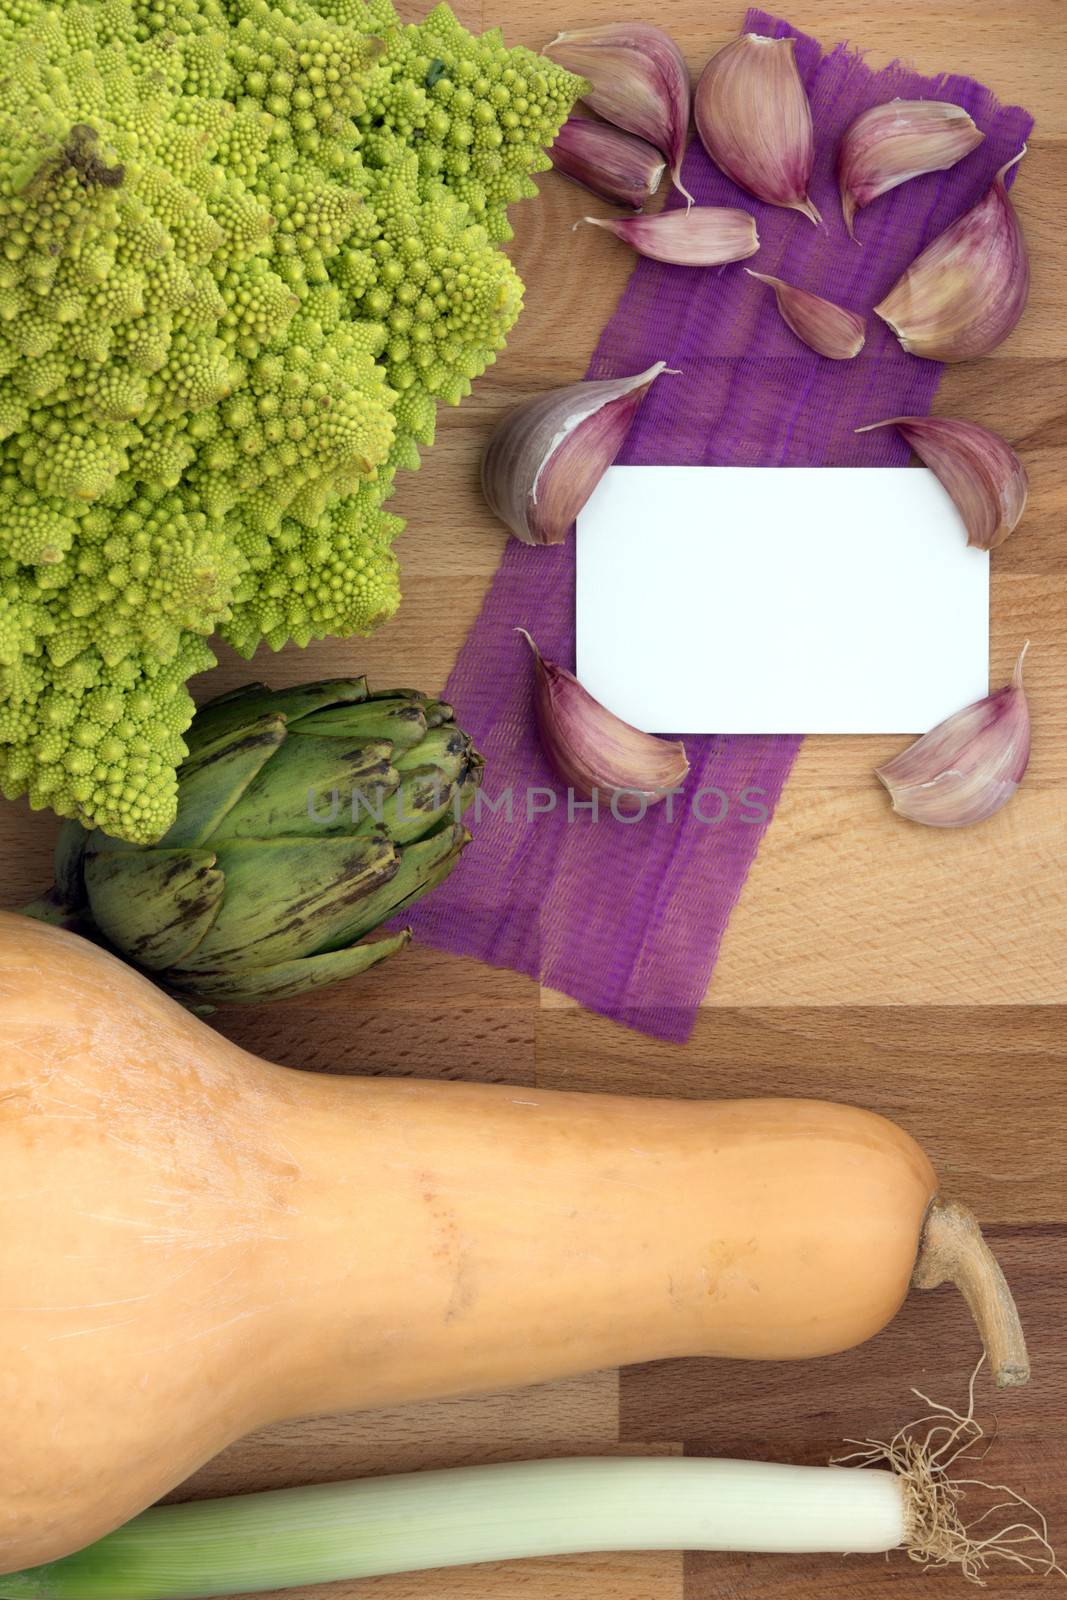 Vegetables on chooping board with white card for text